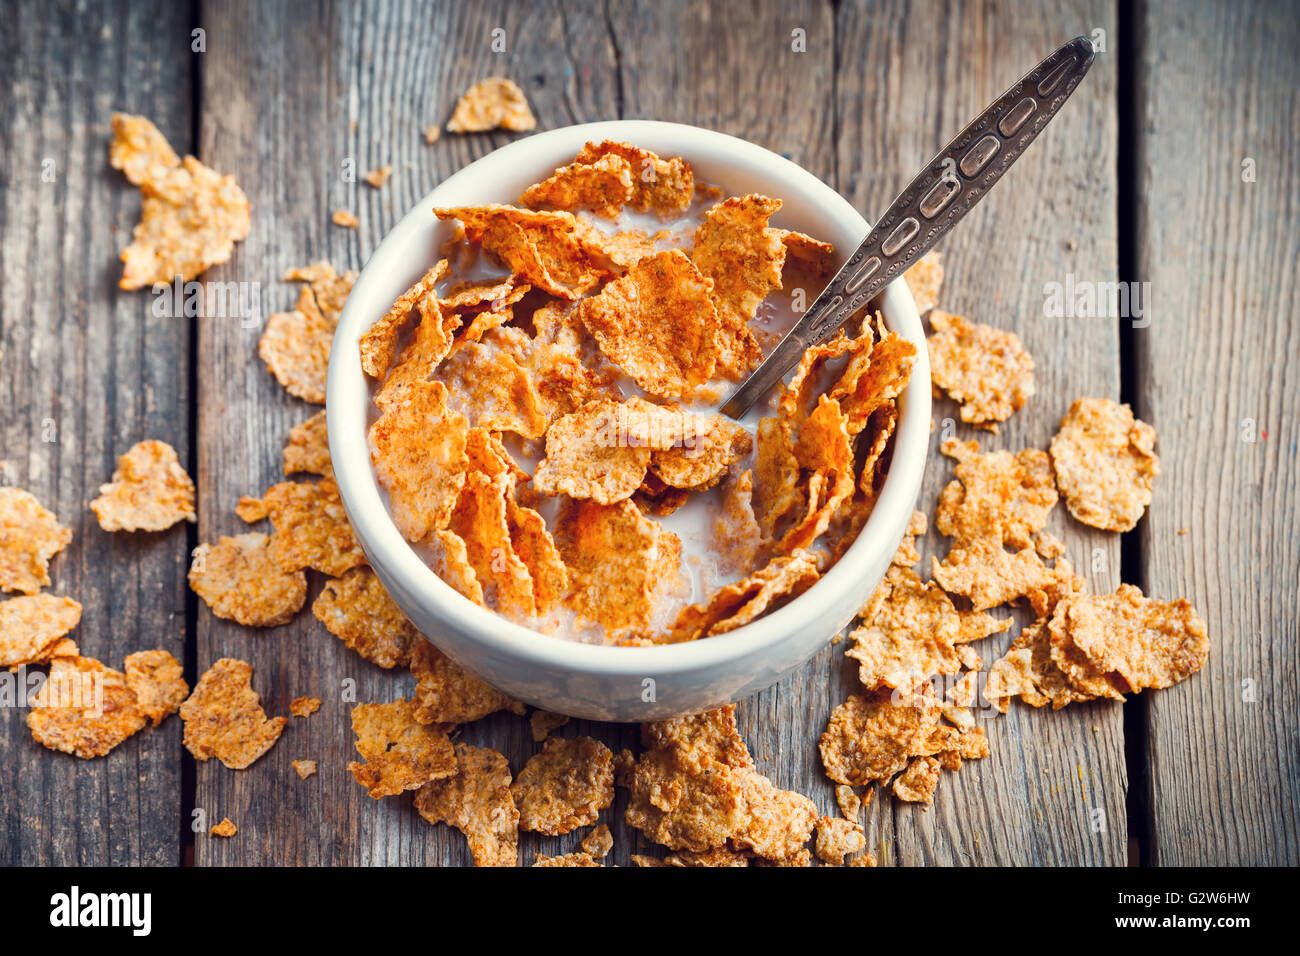 Breakfast cereal wheat flakes in bowl with milk on wooden table Stock Photo